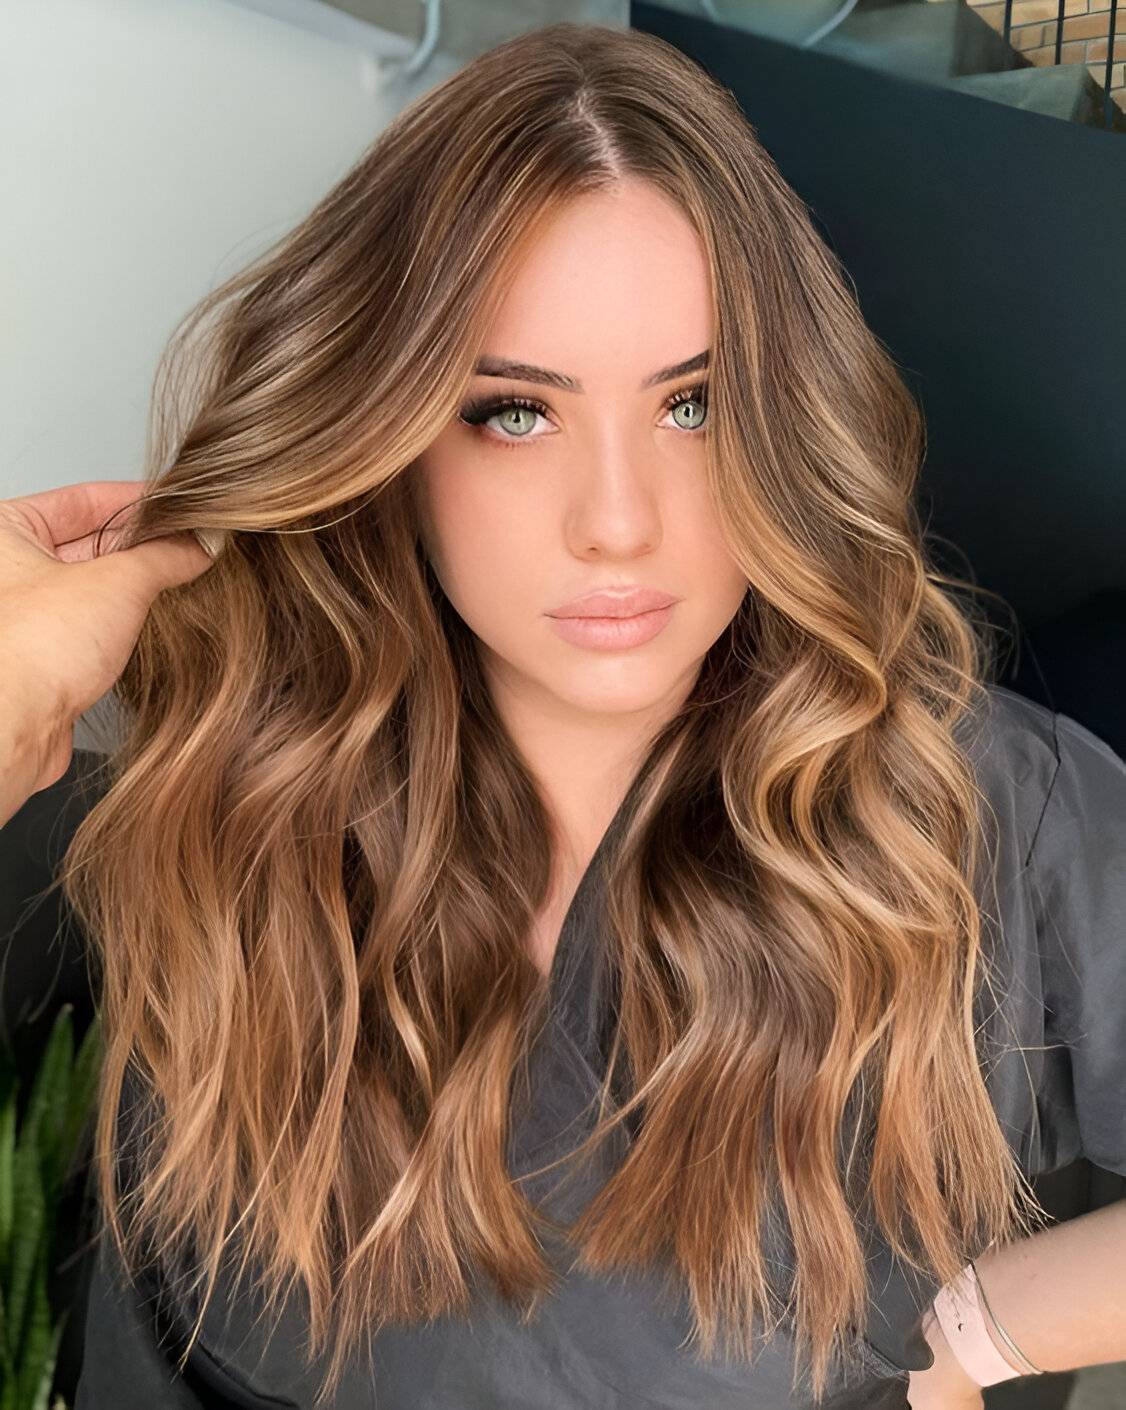 27 Gorgeous Golden Brown Hair Ideas To Make You Stunning Like A Model 26